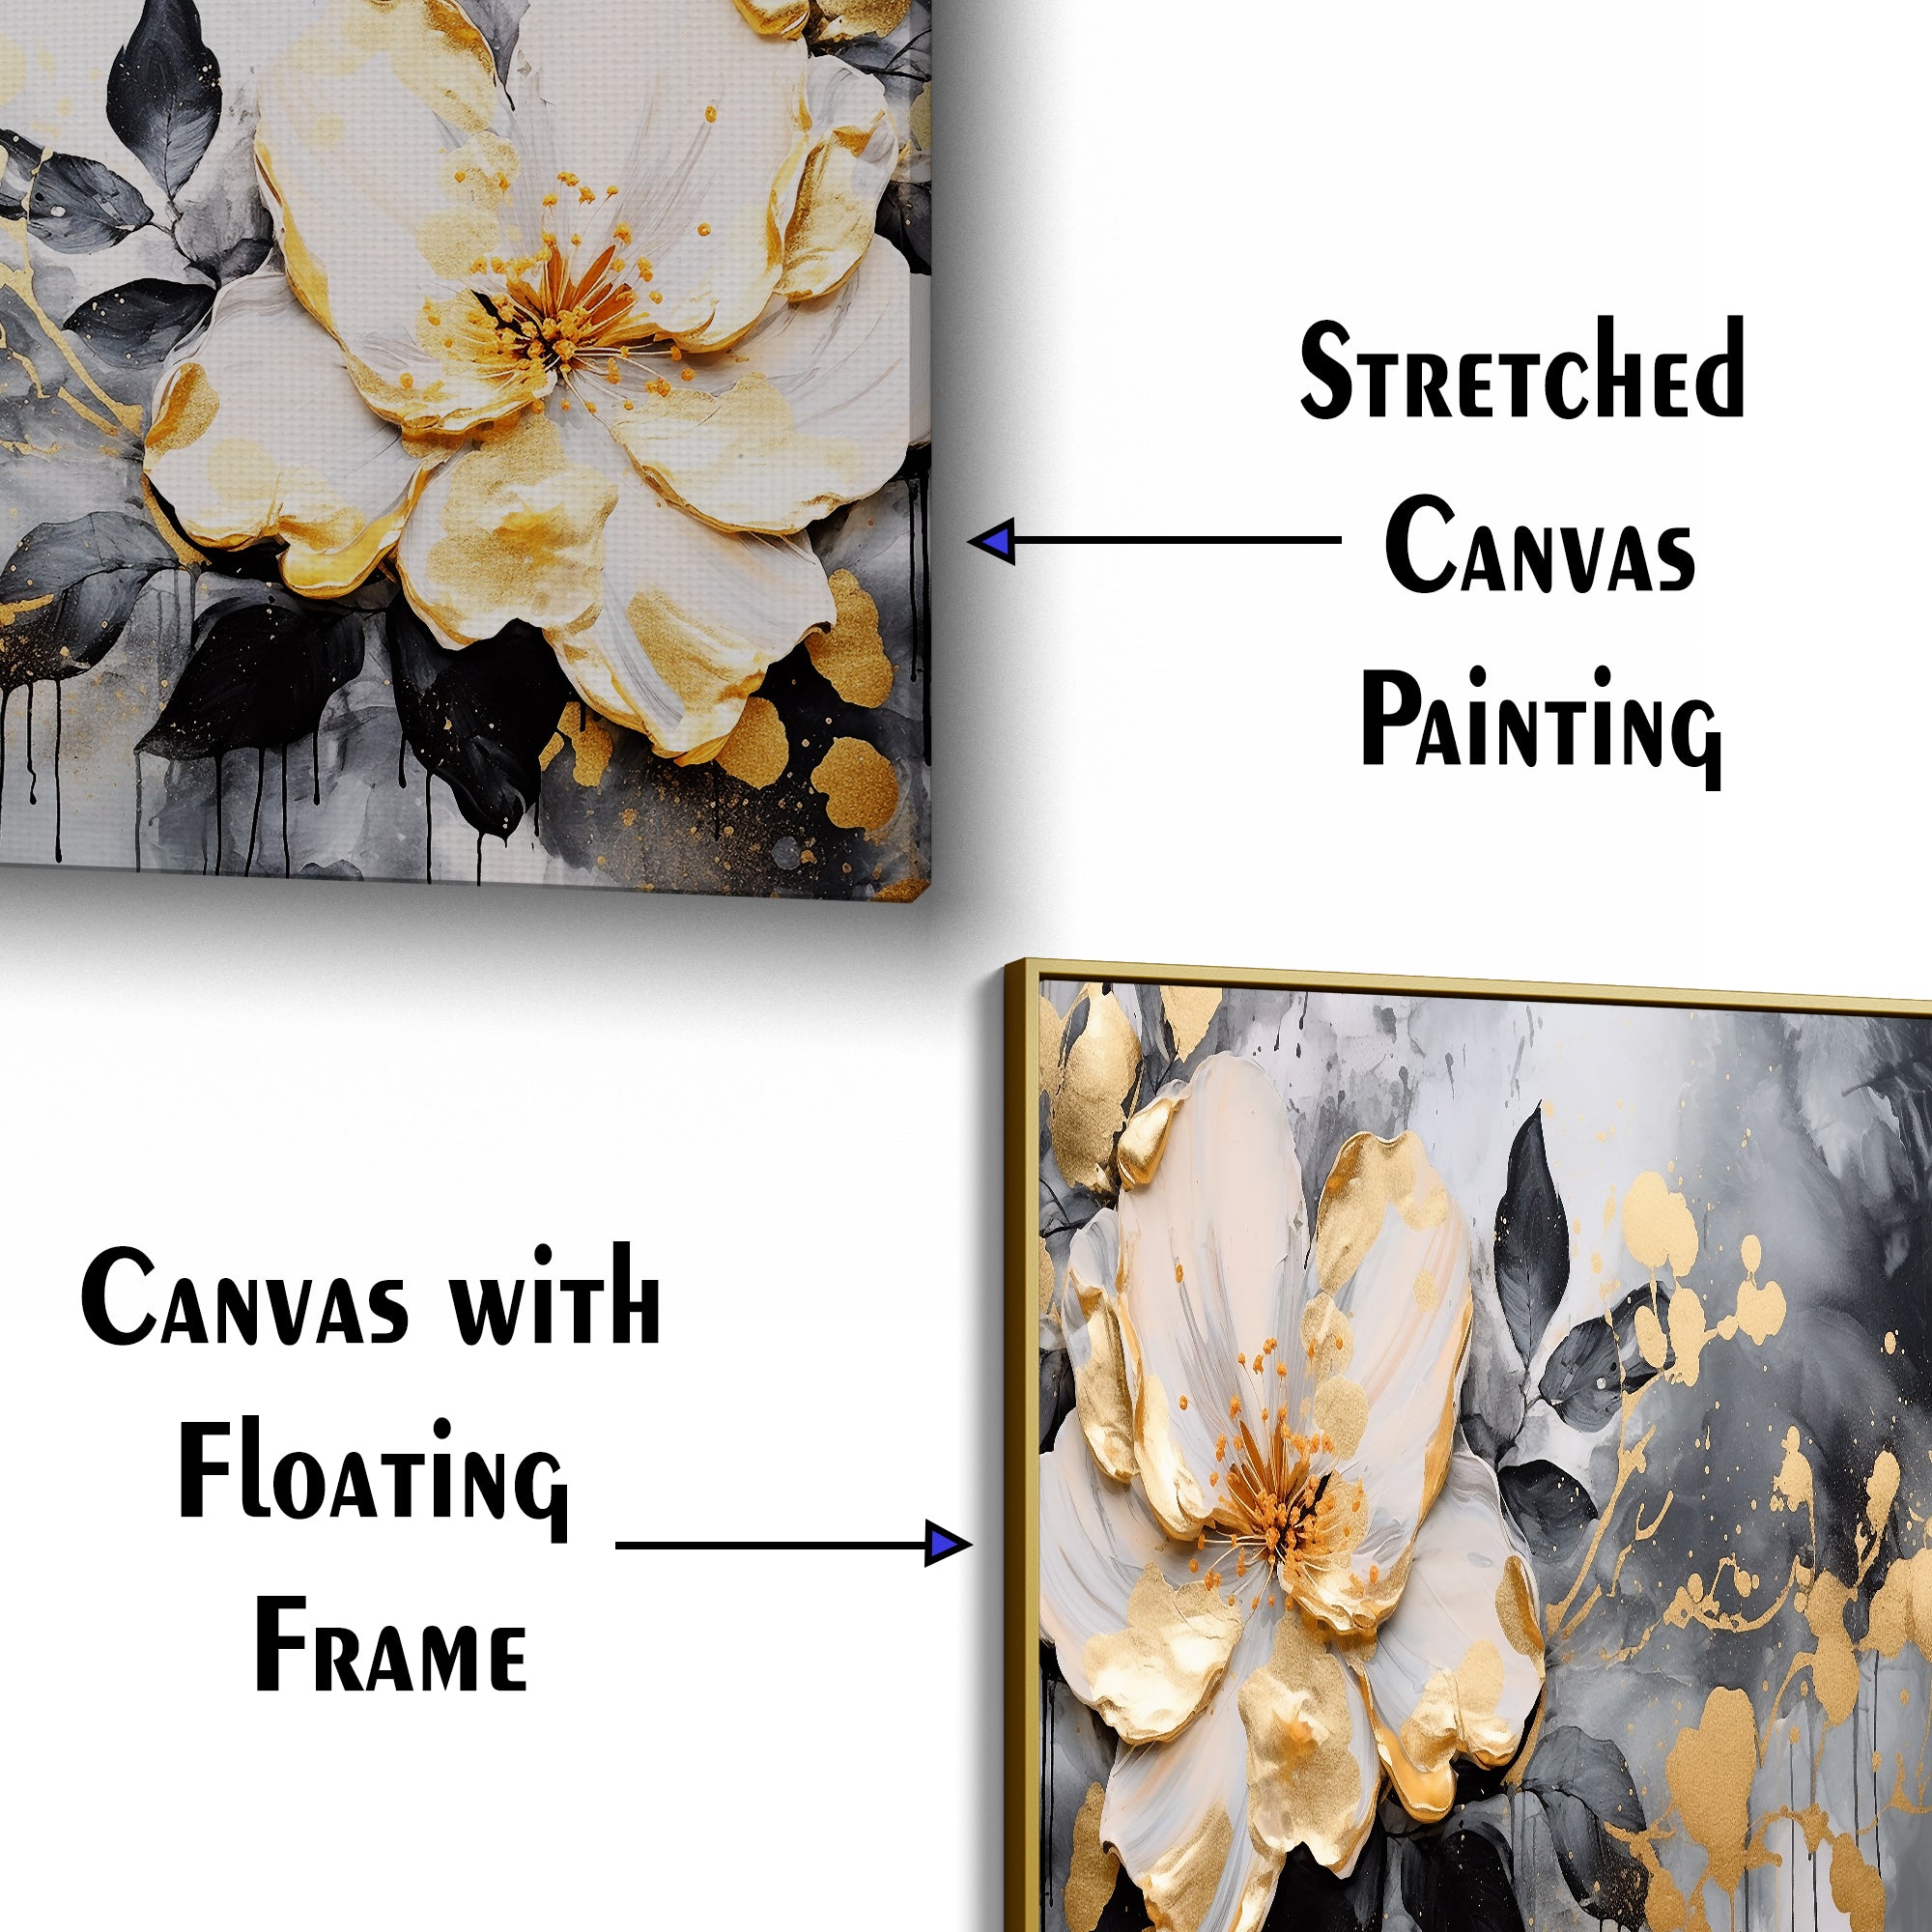 Beautiful Flower WIth Black Backgound Canvas Wall Painting